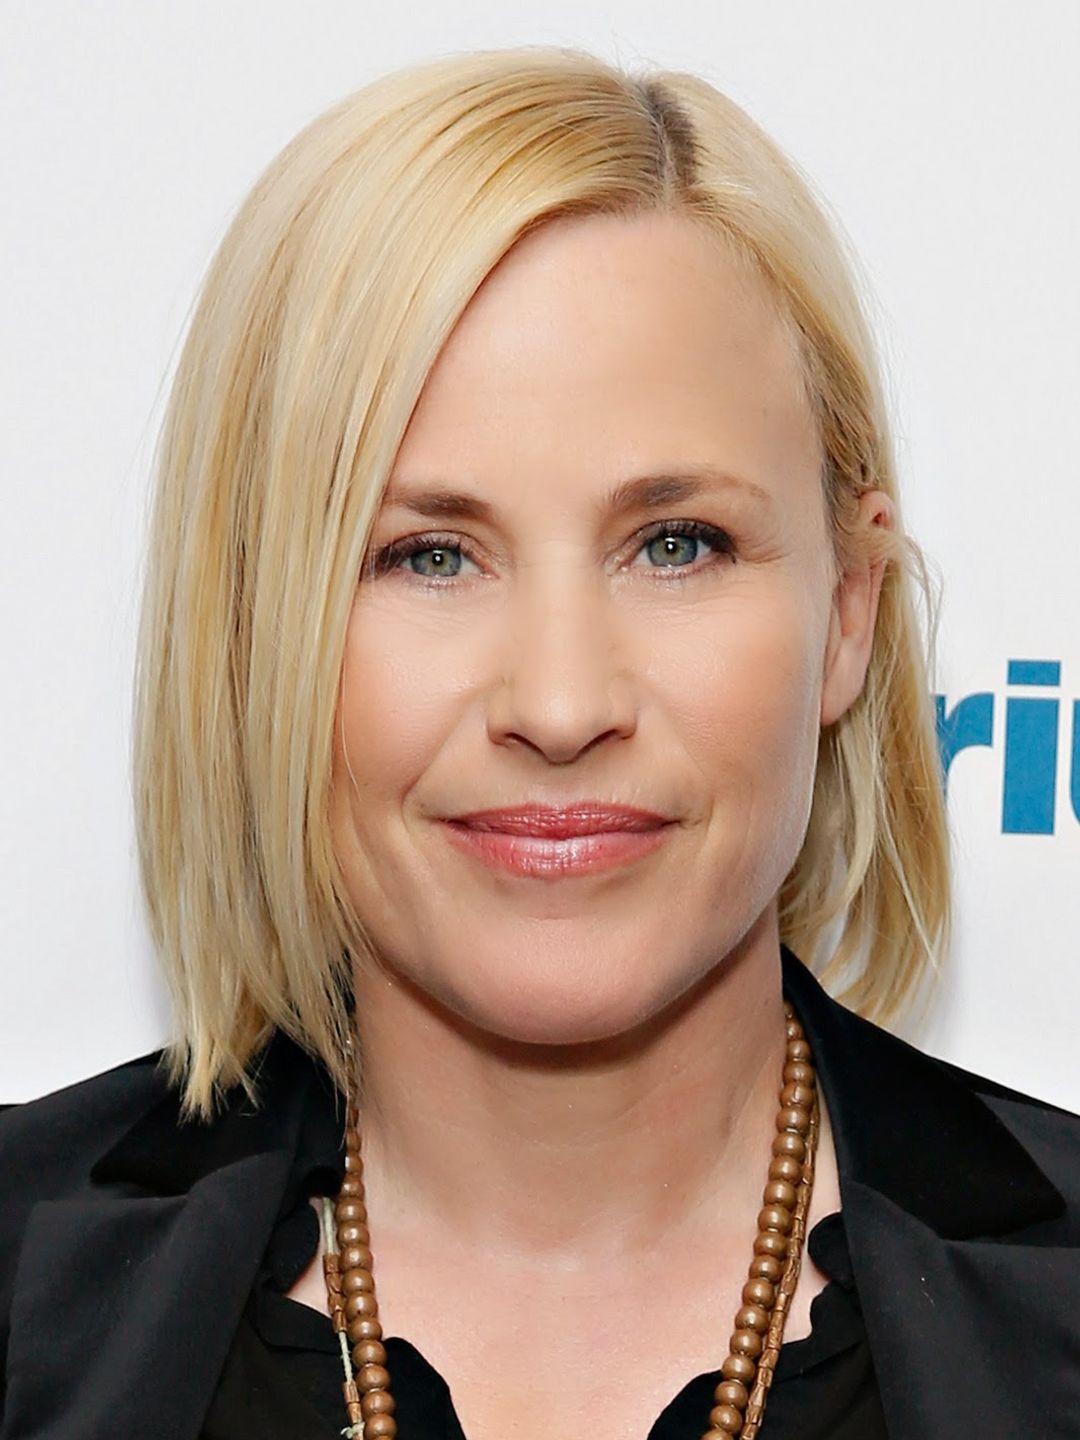 Patricia Arquette early career